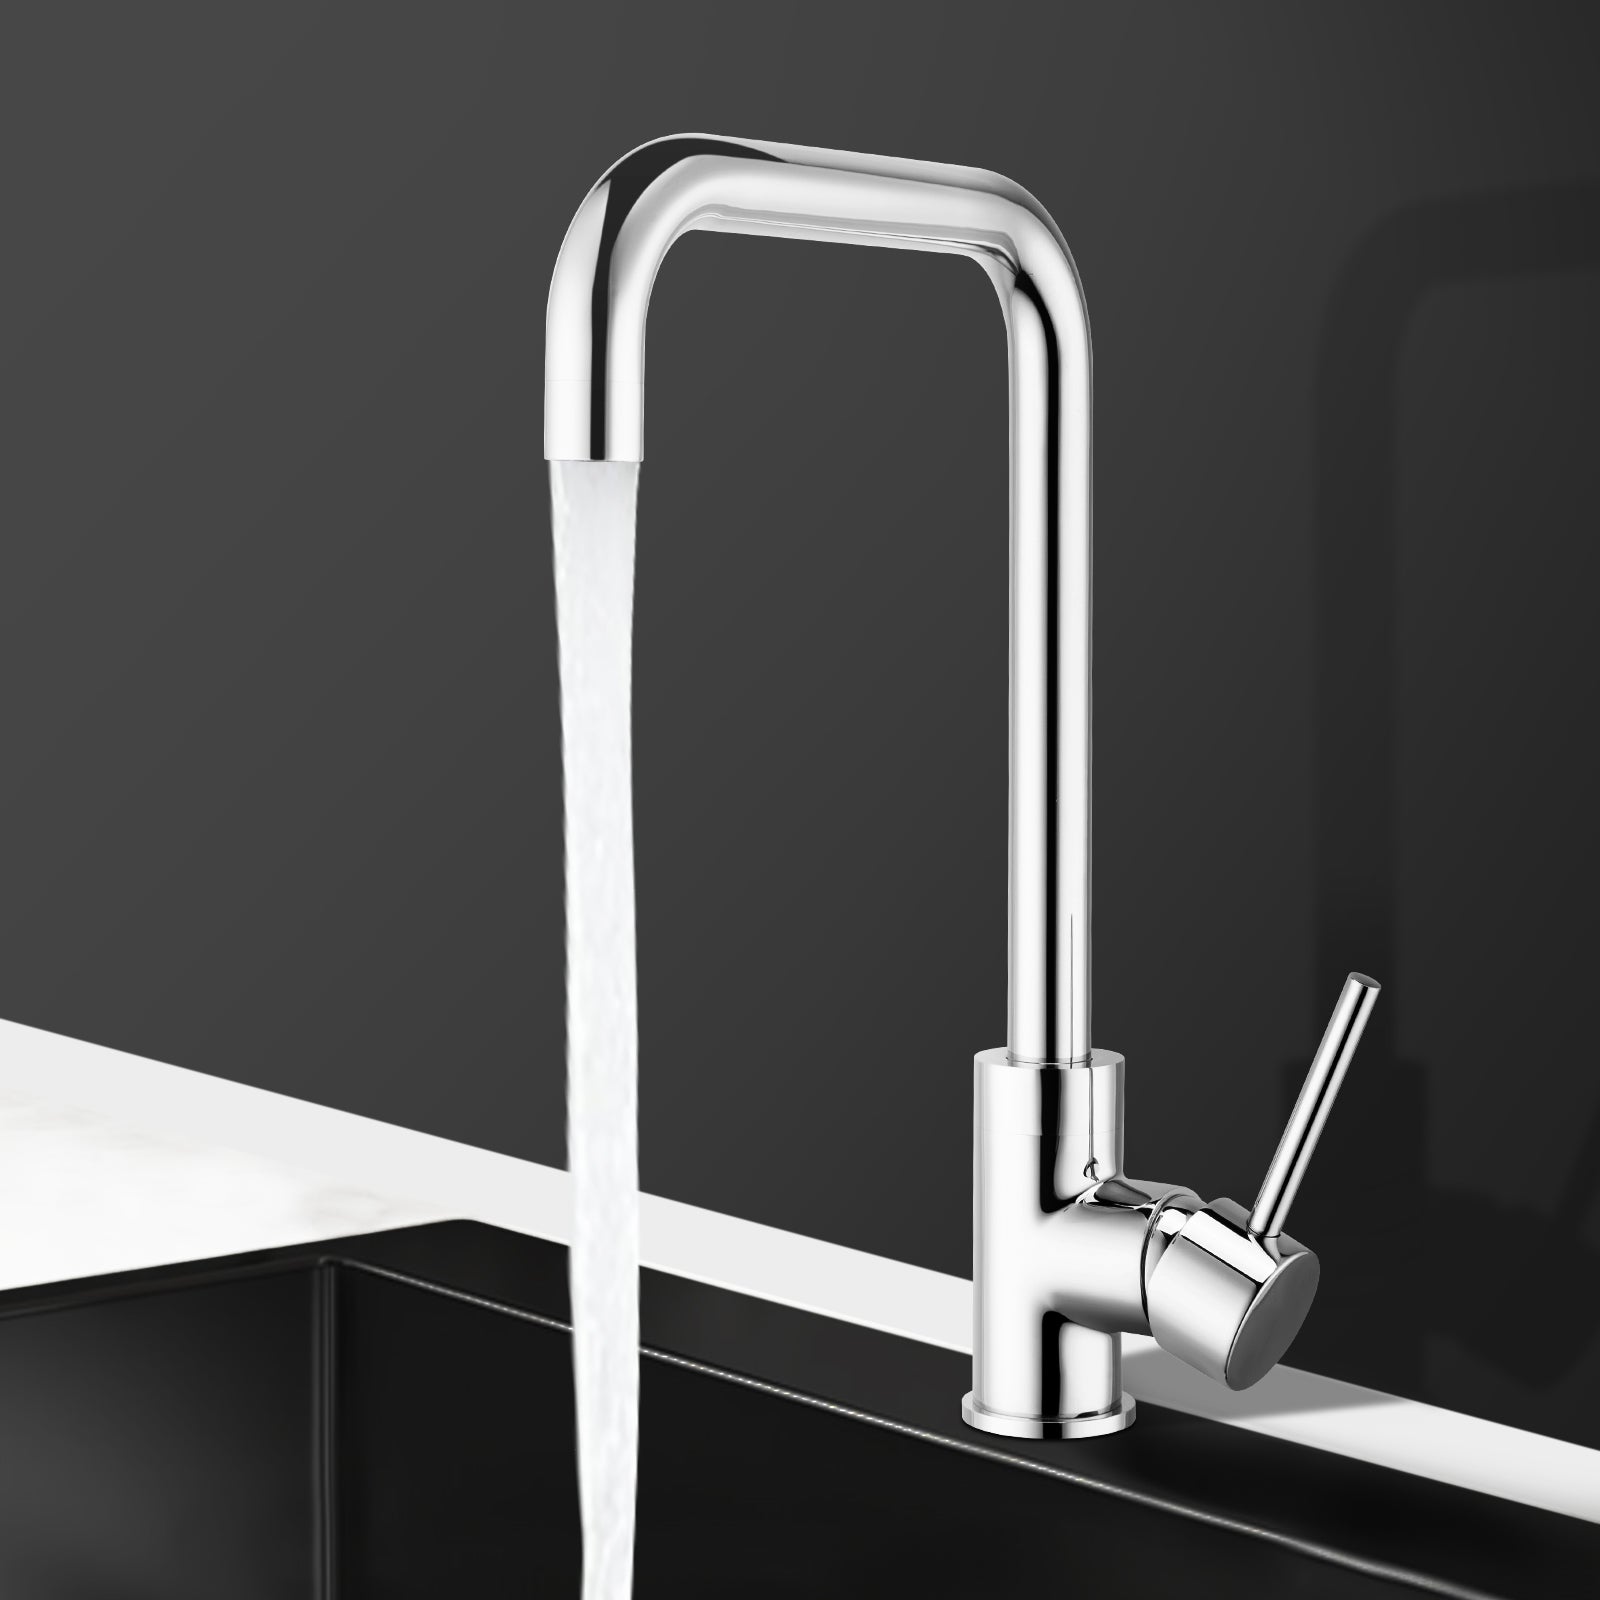 ACA Kitchen Tap Mixer Tap Round Chrome Swivel Spout Laundry Sink Basin Faucet Watermark WELS